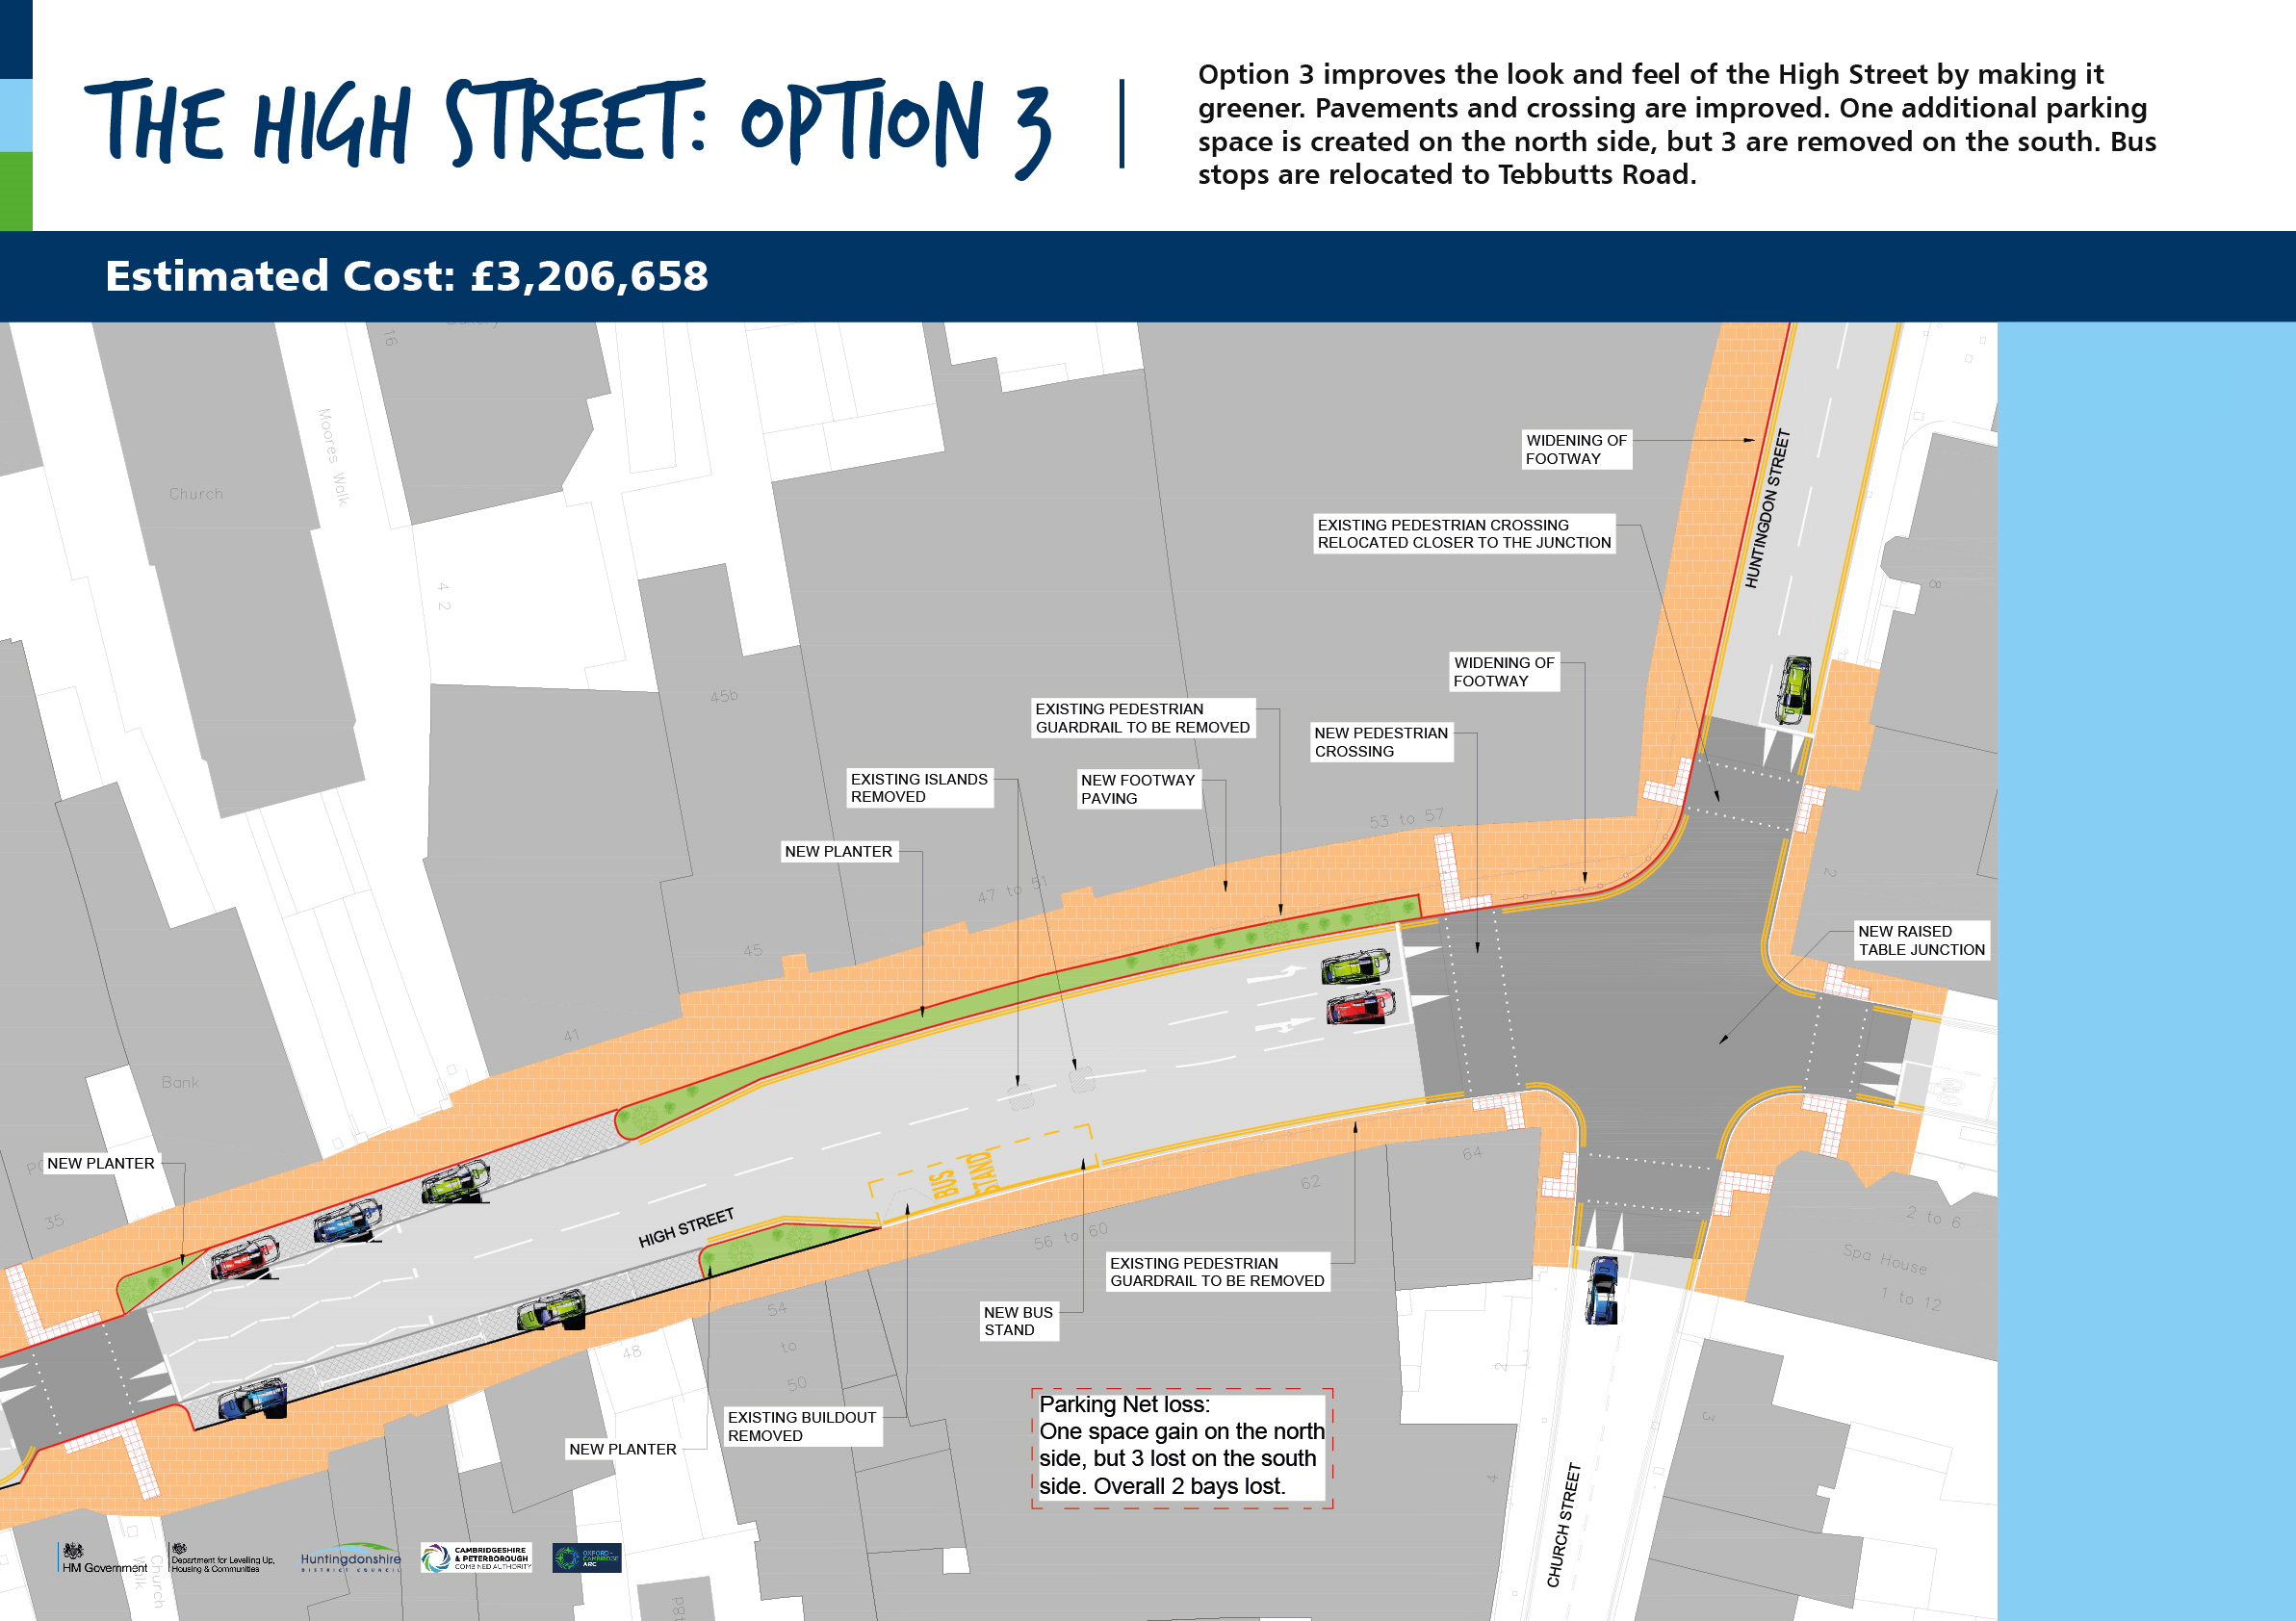 The High Street: Option 3 Estimated cost: £3,206,658 Option 3 improves the look and feel of the high street by making it greener. Pavements and crossing are improved. One additional parking space is created n the north side, but 3 are removed on the south. Bus stops are relocated to Tebbutts Road. Image of map showing the street